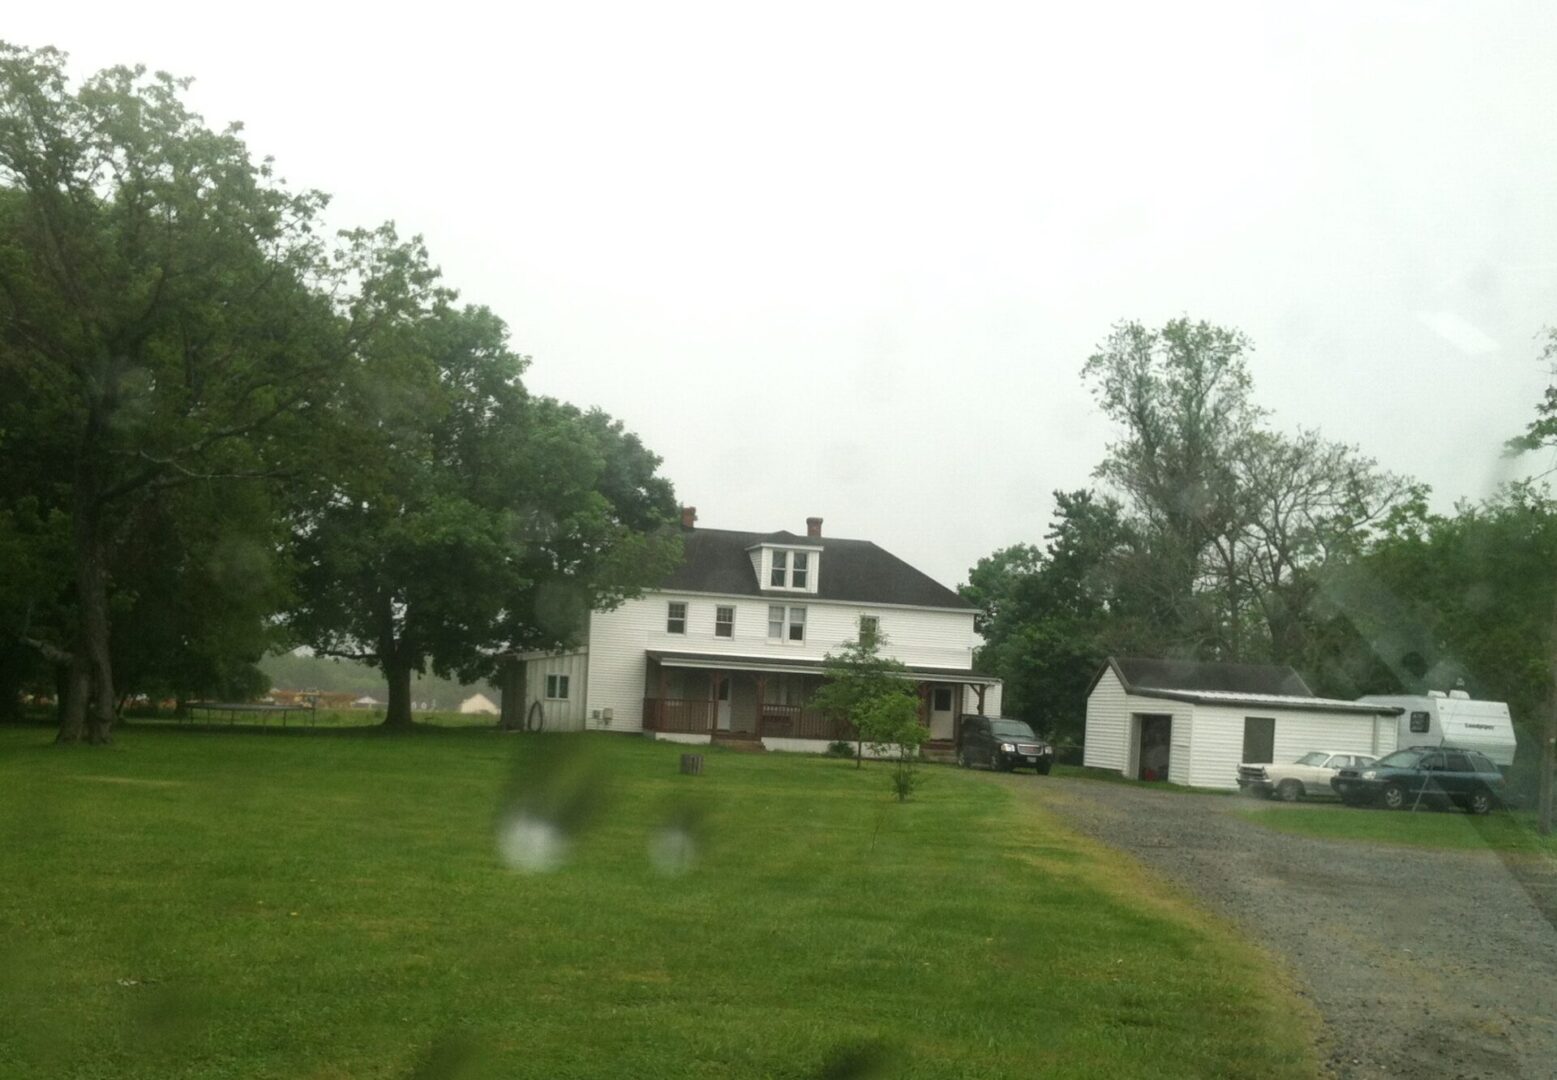 Faraway POV of a white two-story house with an attic in a wide field